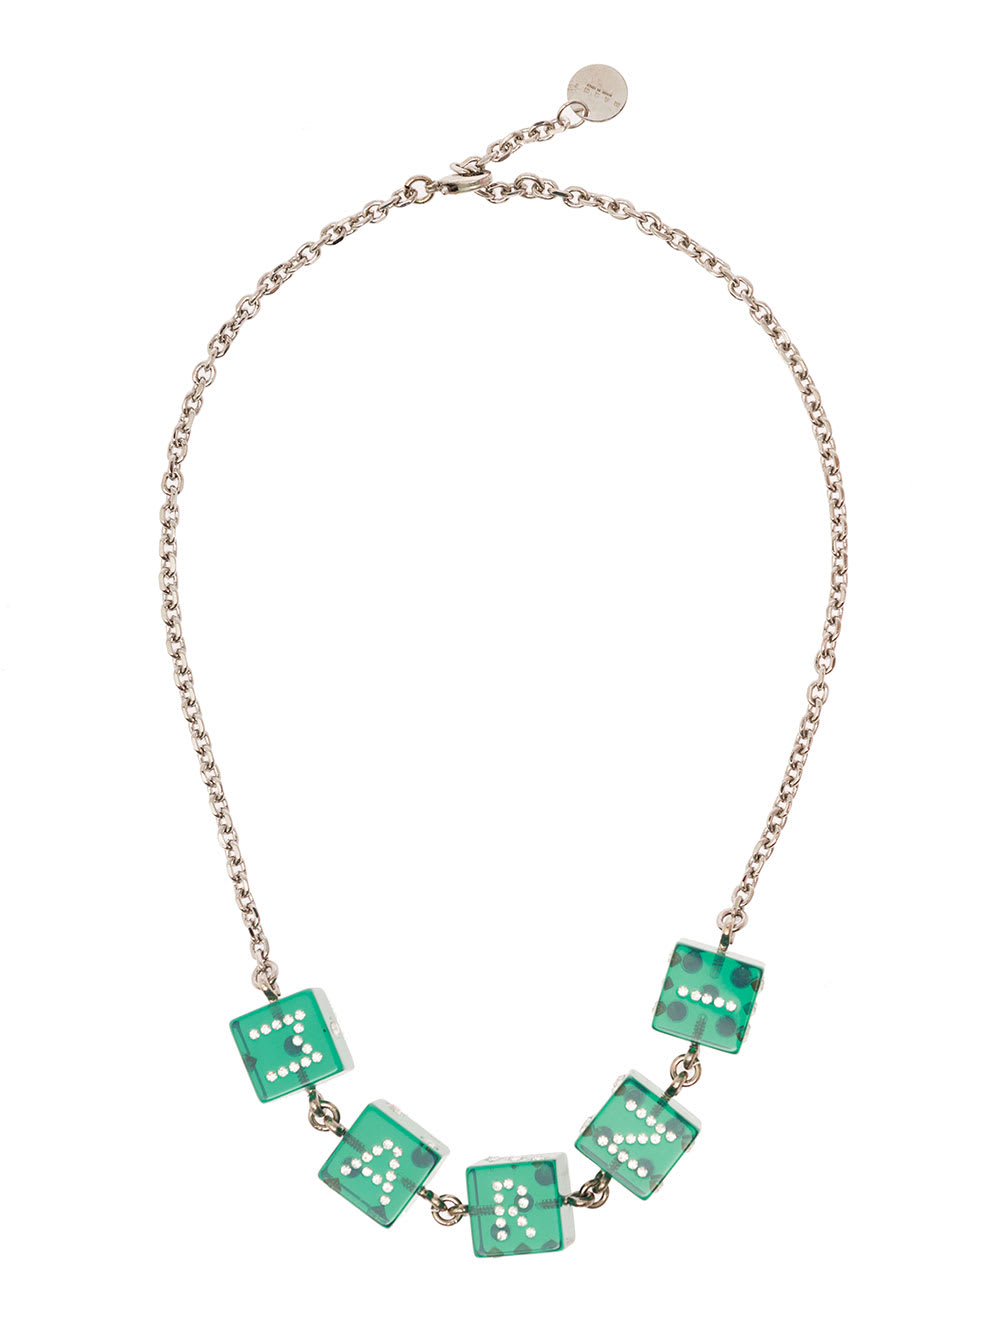 MARNI CHAIN NECKLACE WITH BRANDED DICE-SHAPED CHARMS IN GREEN TRANSPARENT RESIN WOMAN